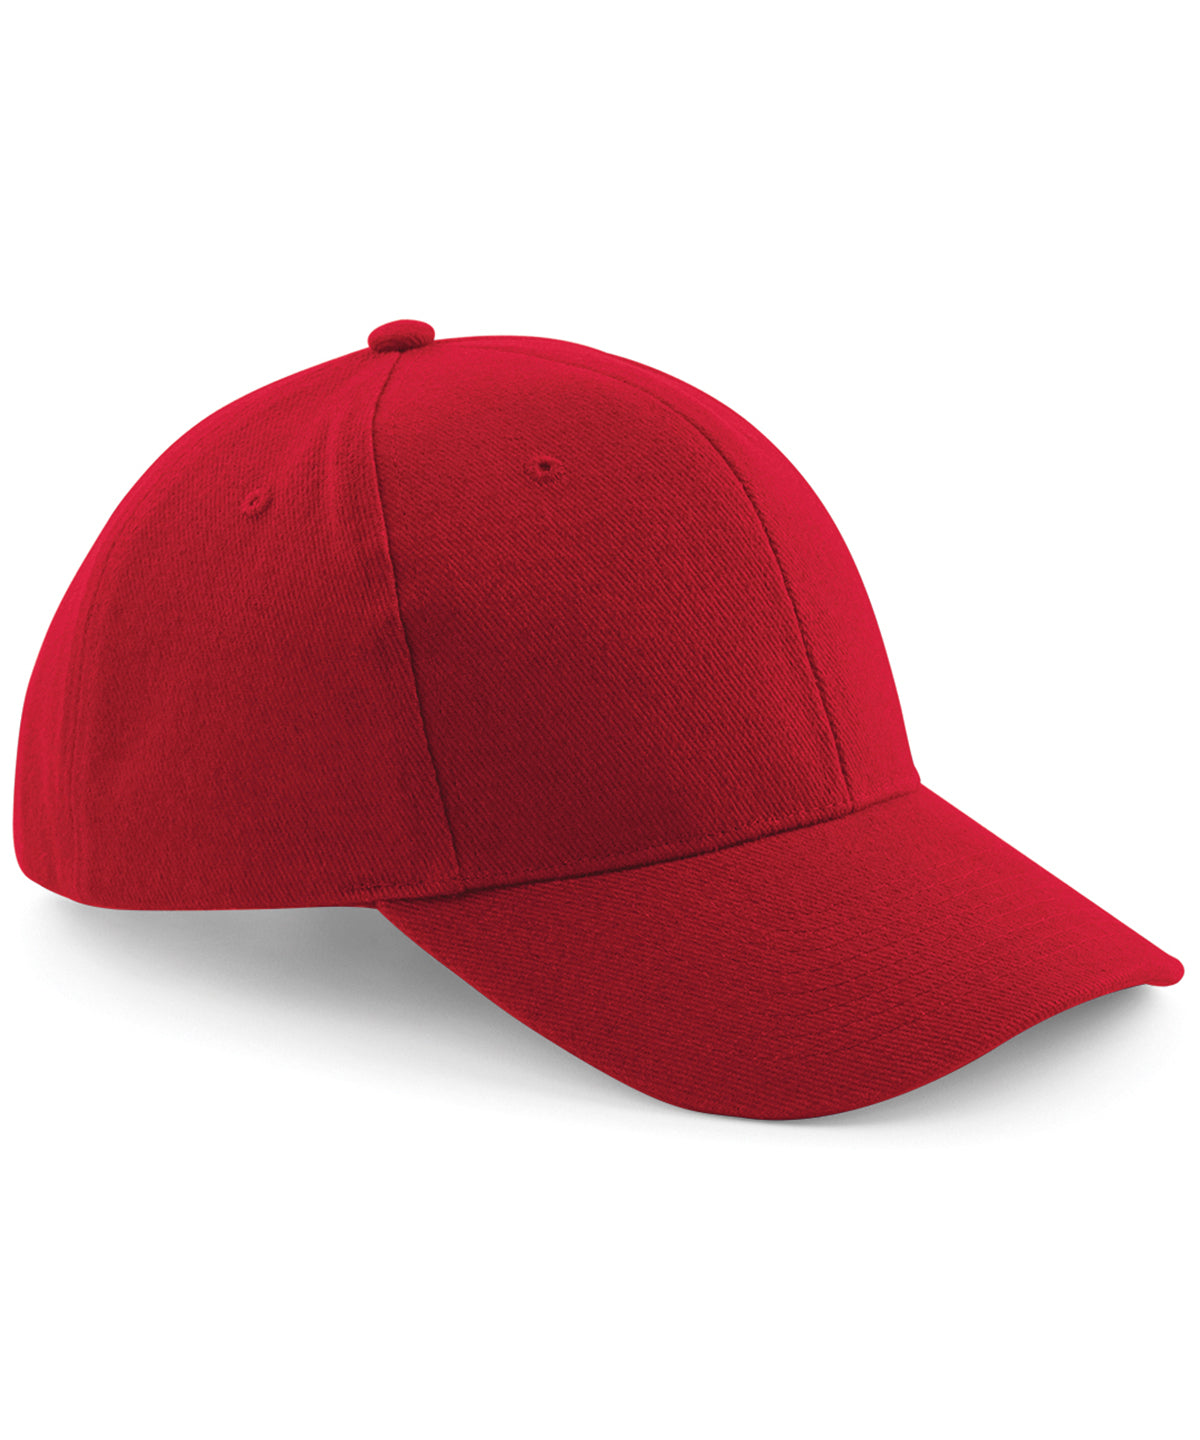 Personalised Caps - Mid Red Beechfield Pro-style heavy brushed cotton cap